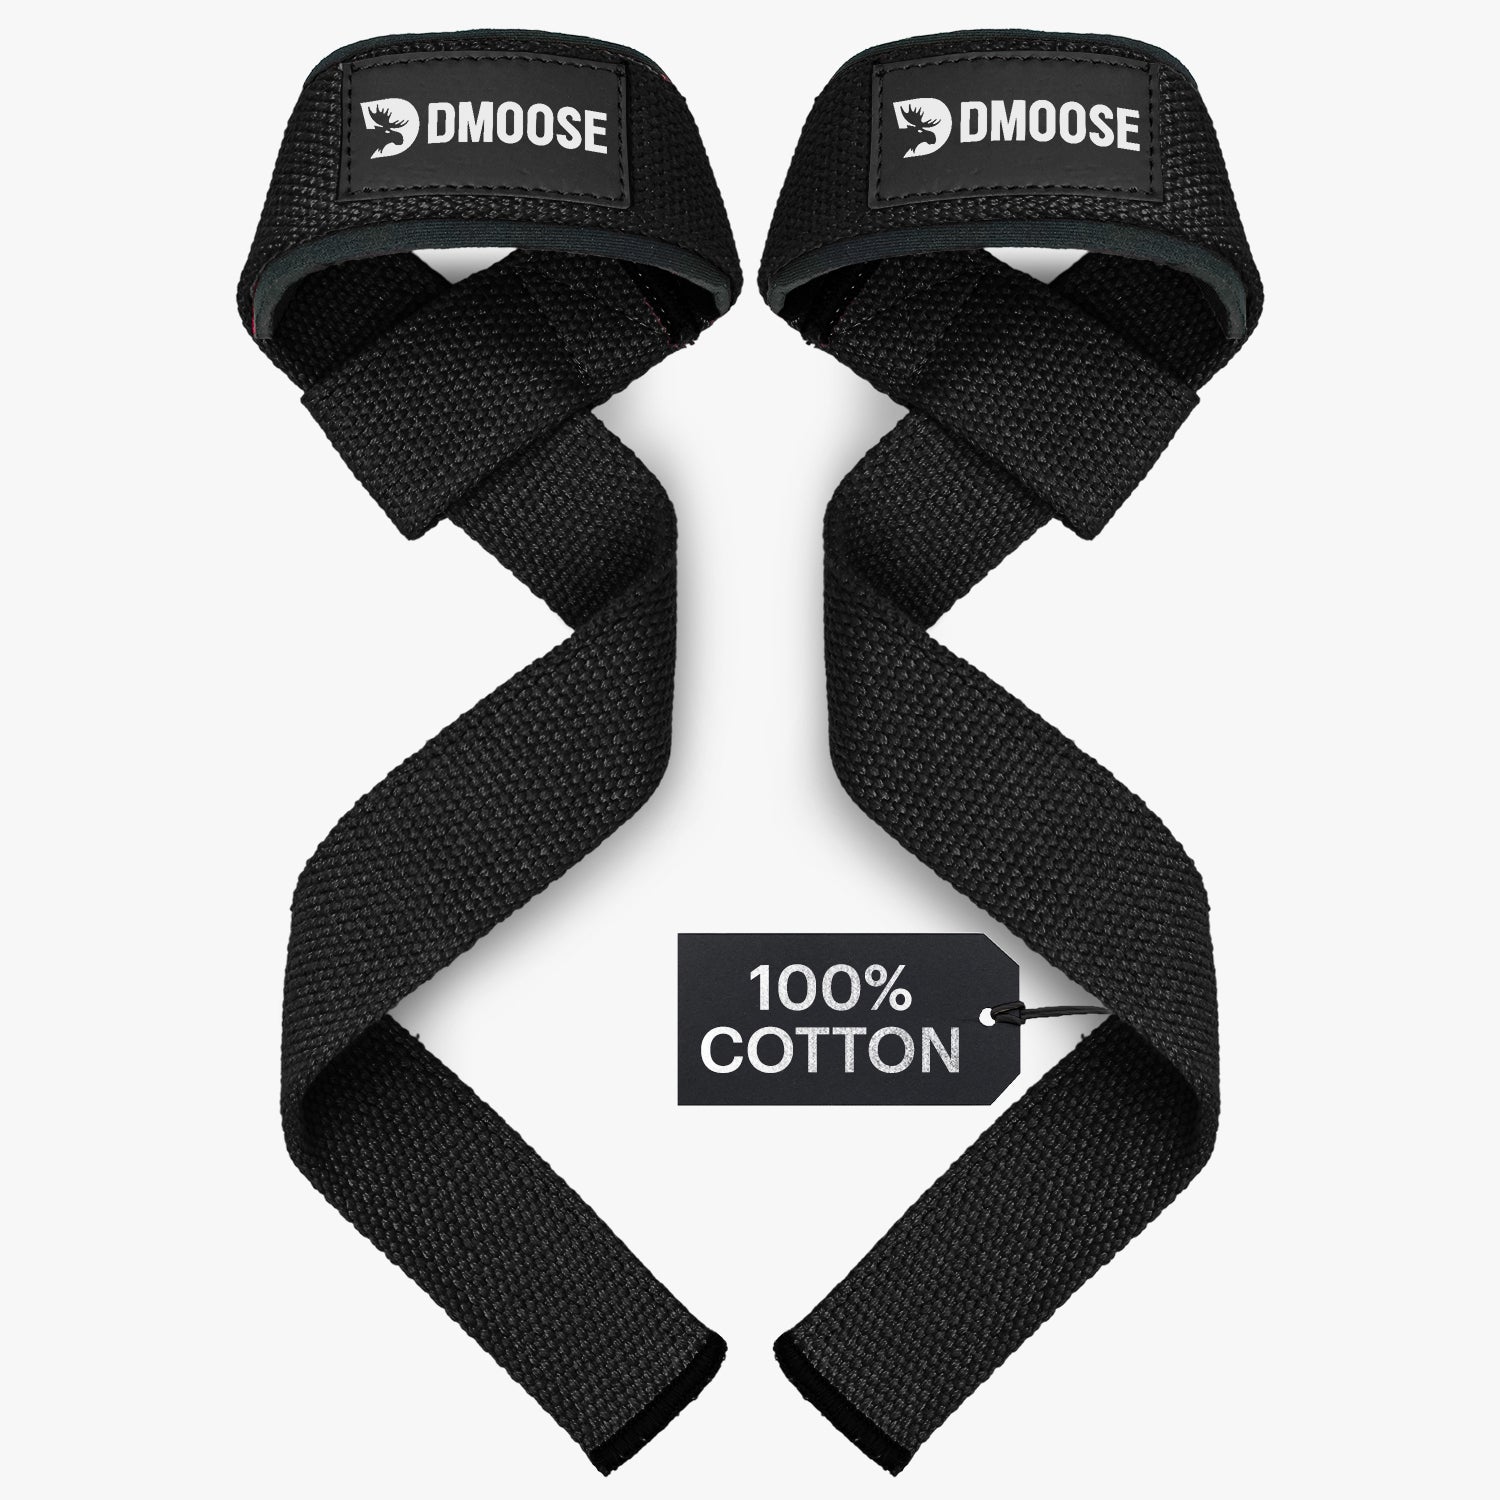 DMoose Weight Lifting Hooks for Men and Women, Weight Lifting Straps (Pair)  - 8 mm Thick Padded Neoprene, Double Stitching, Non-Slip Resistant Coating